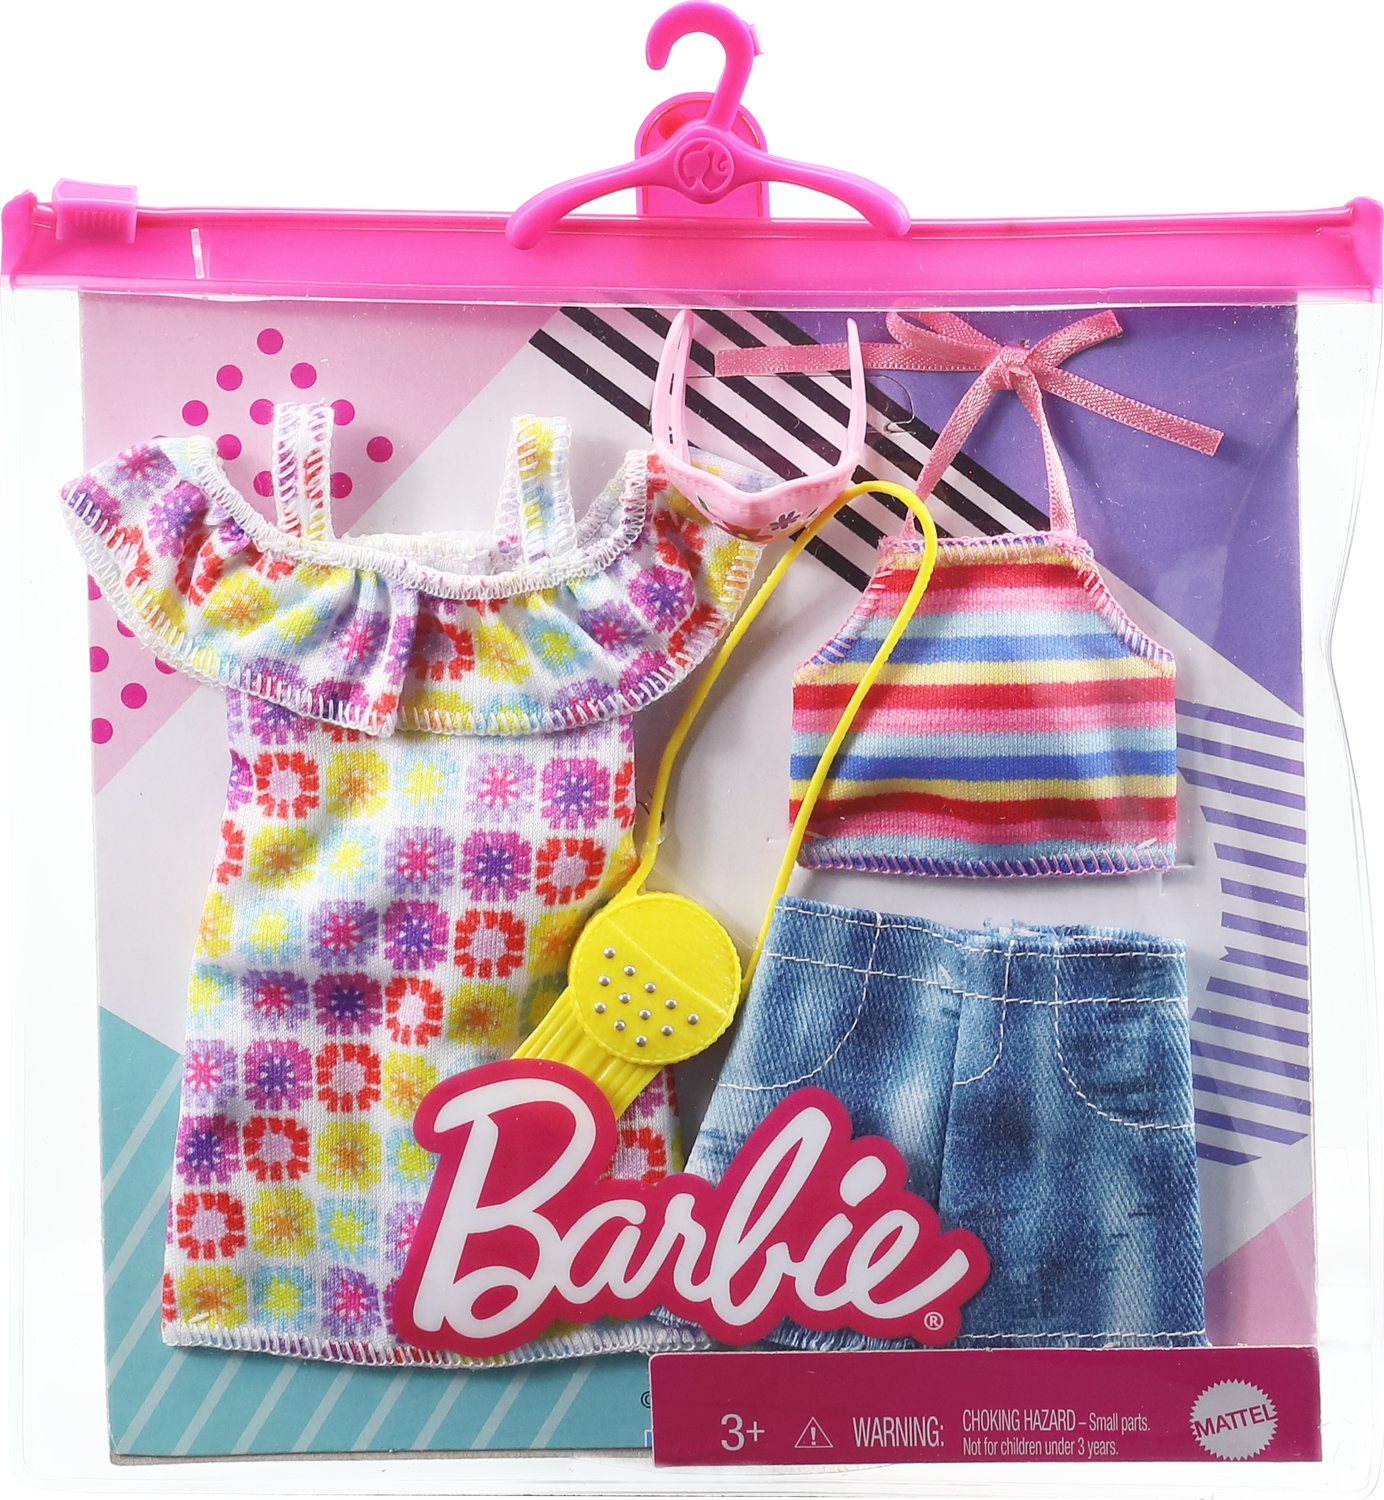 Barbie doll accessory Doll clothes set (assorted) - Toys To Love